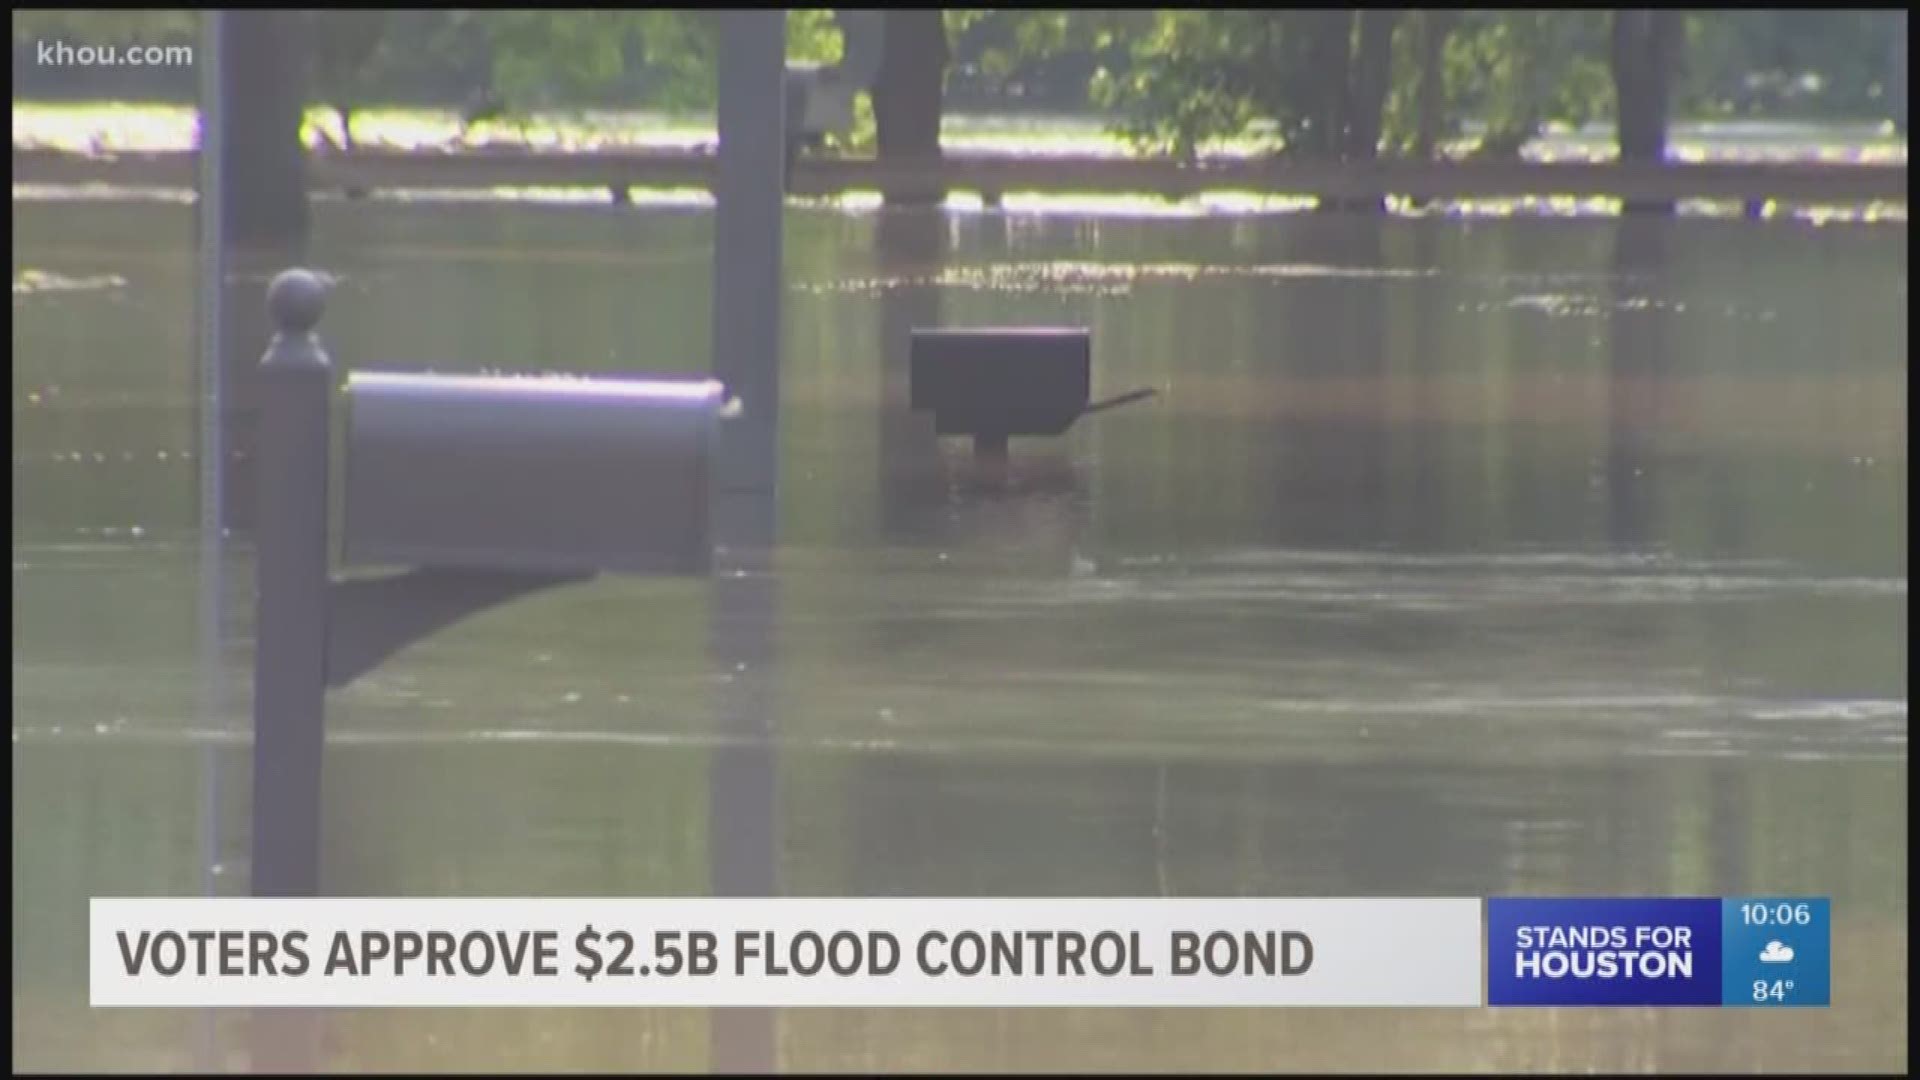 Harris County voters appear to have accepted the $2.5 billion flood control bond, based on unofficial election results from Saturday.